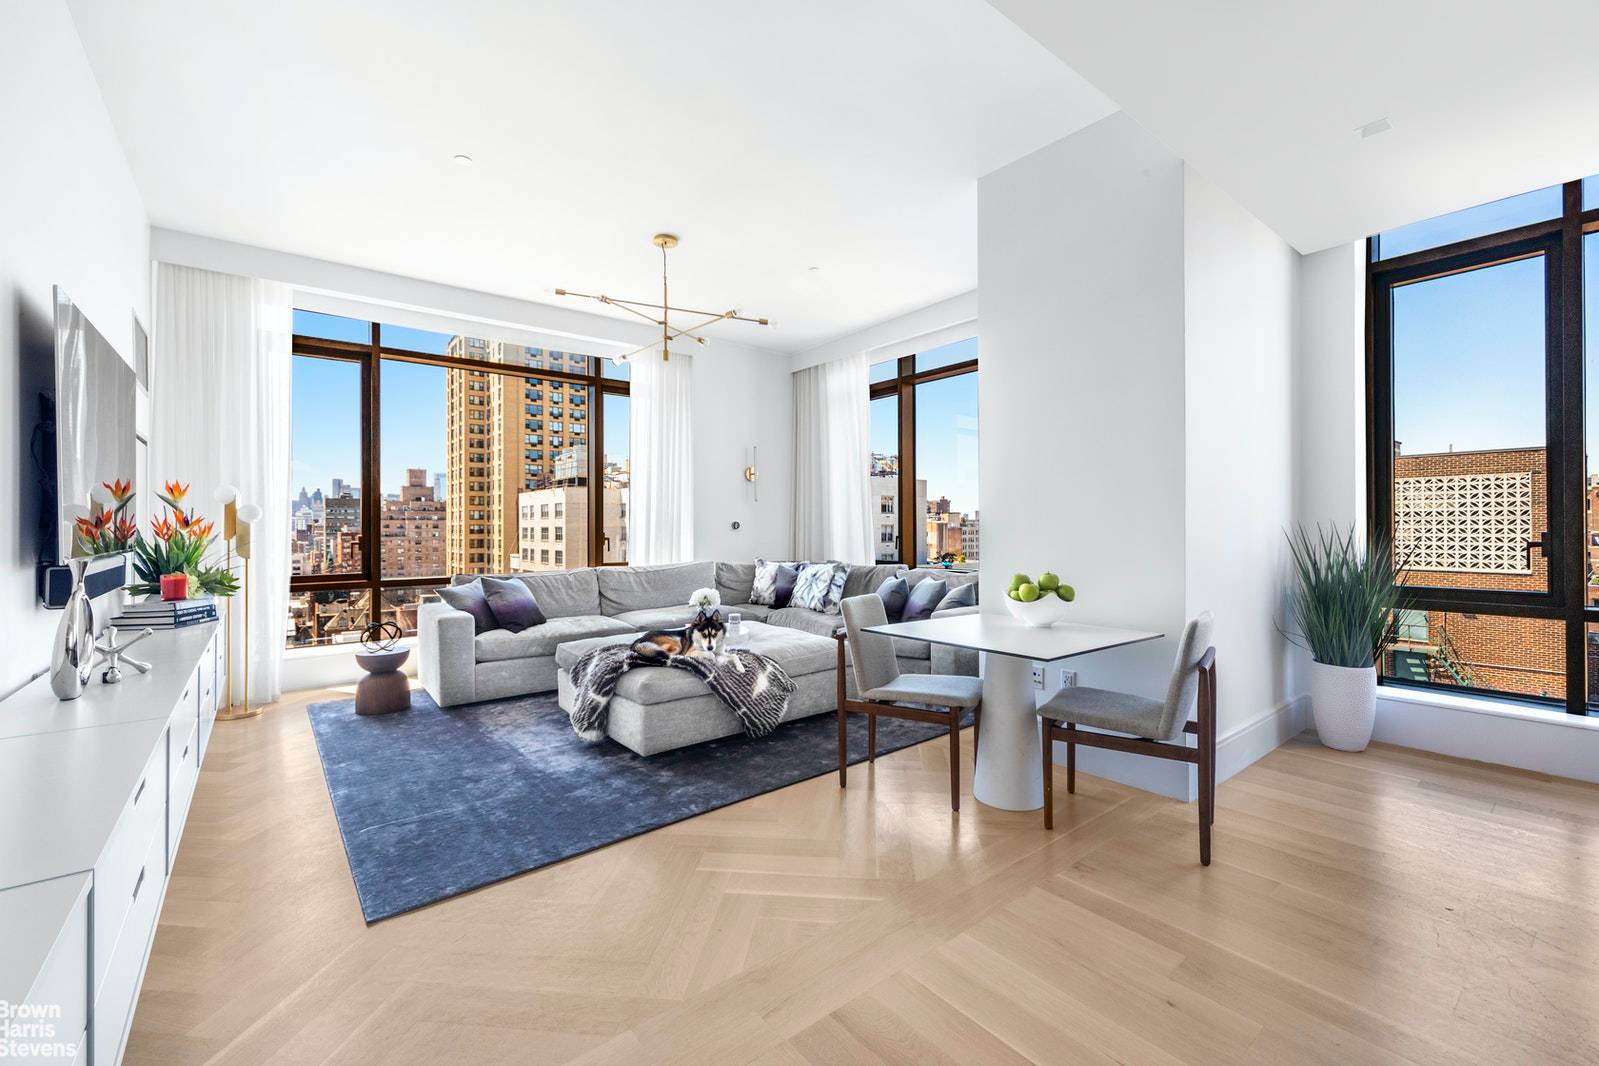 Welcome to luxury living at Gramercy Square.